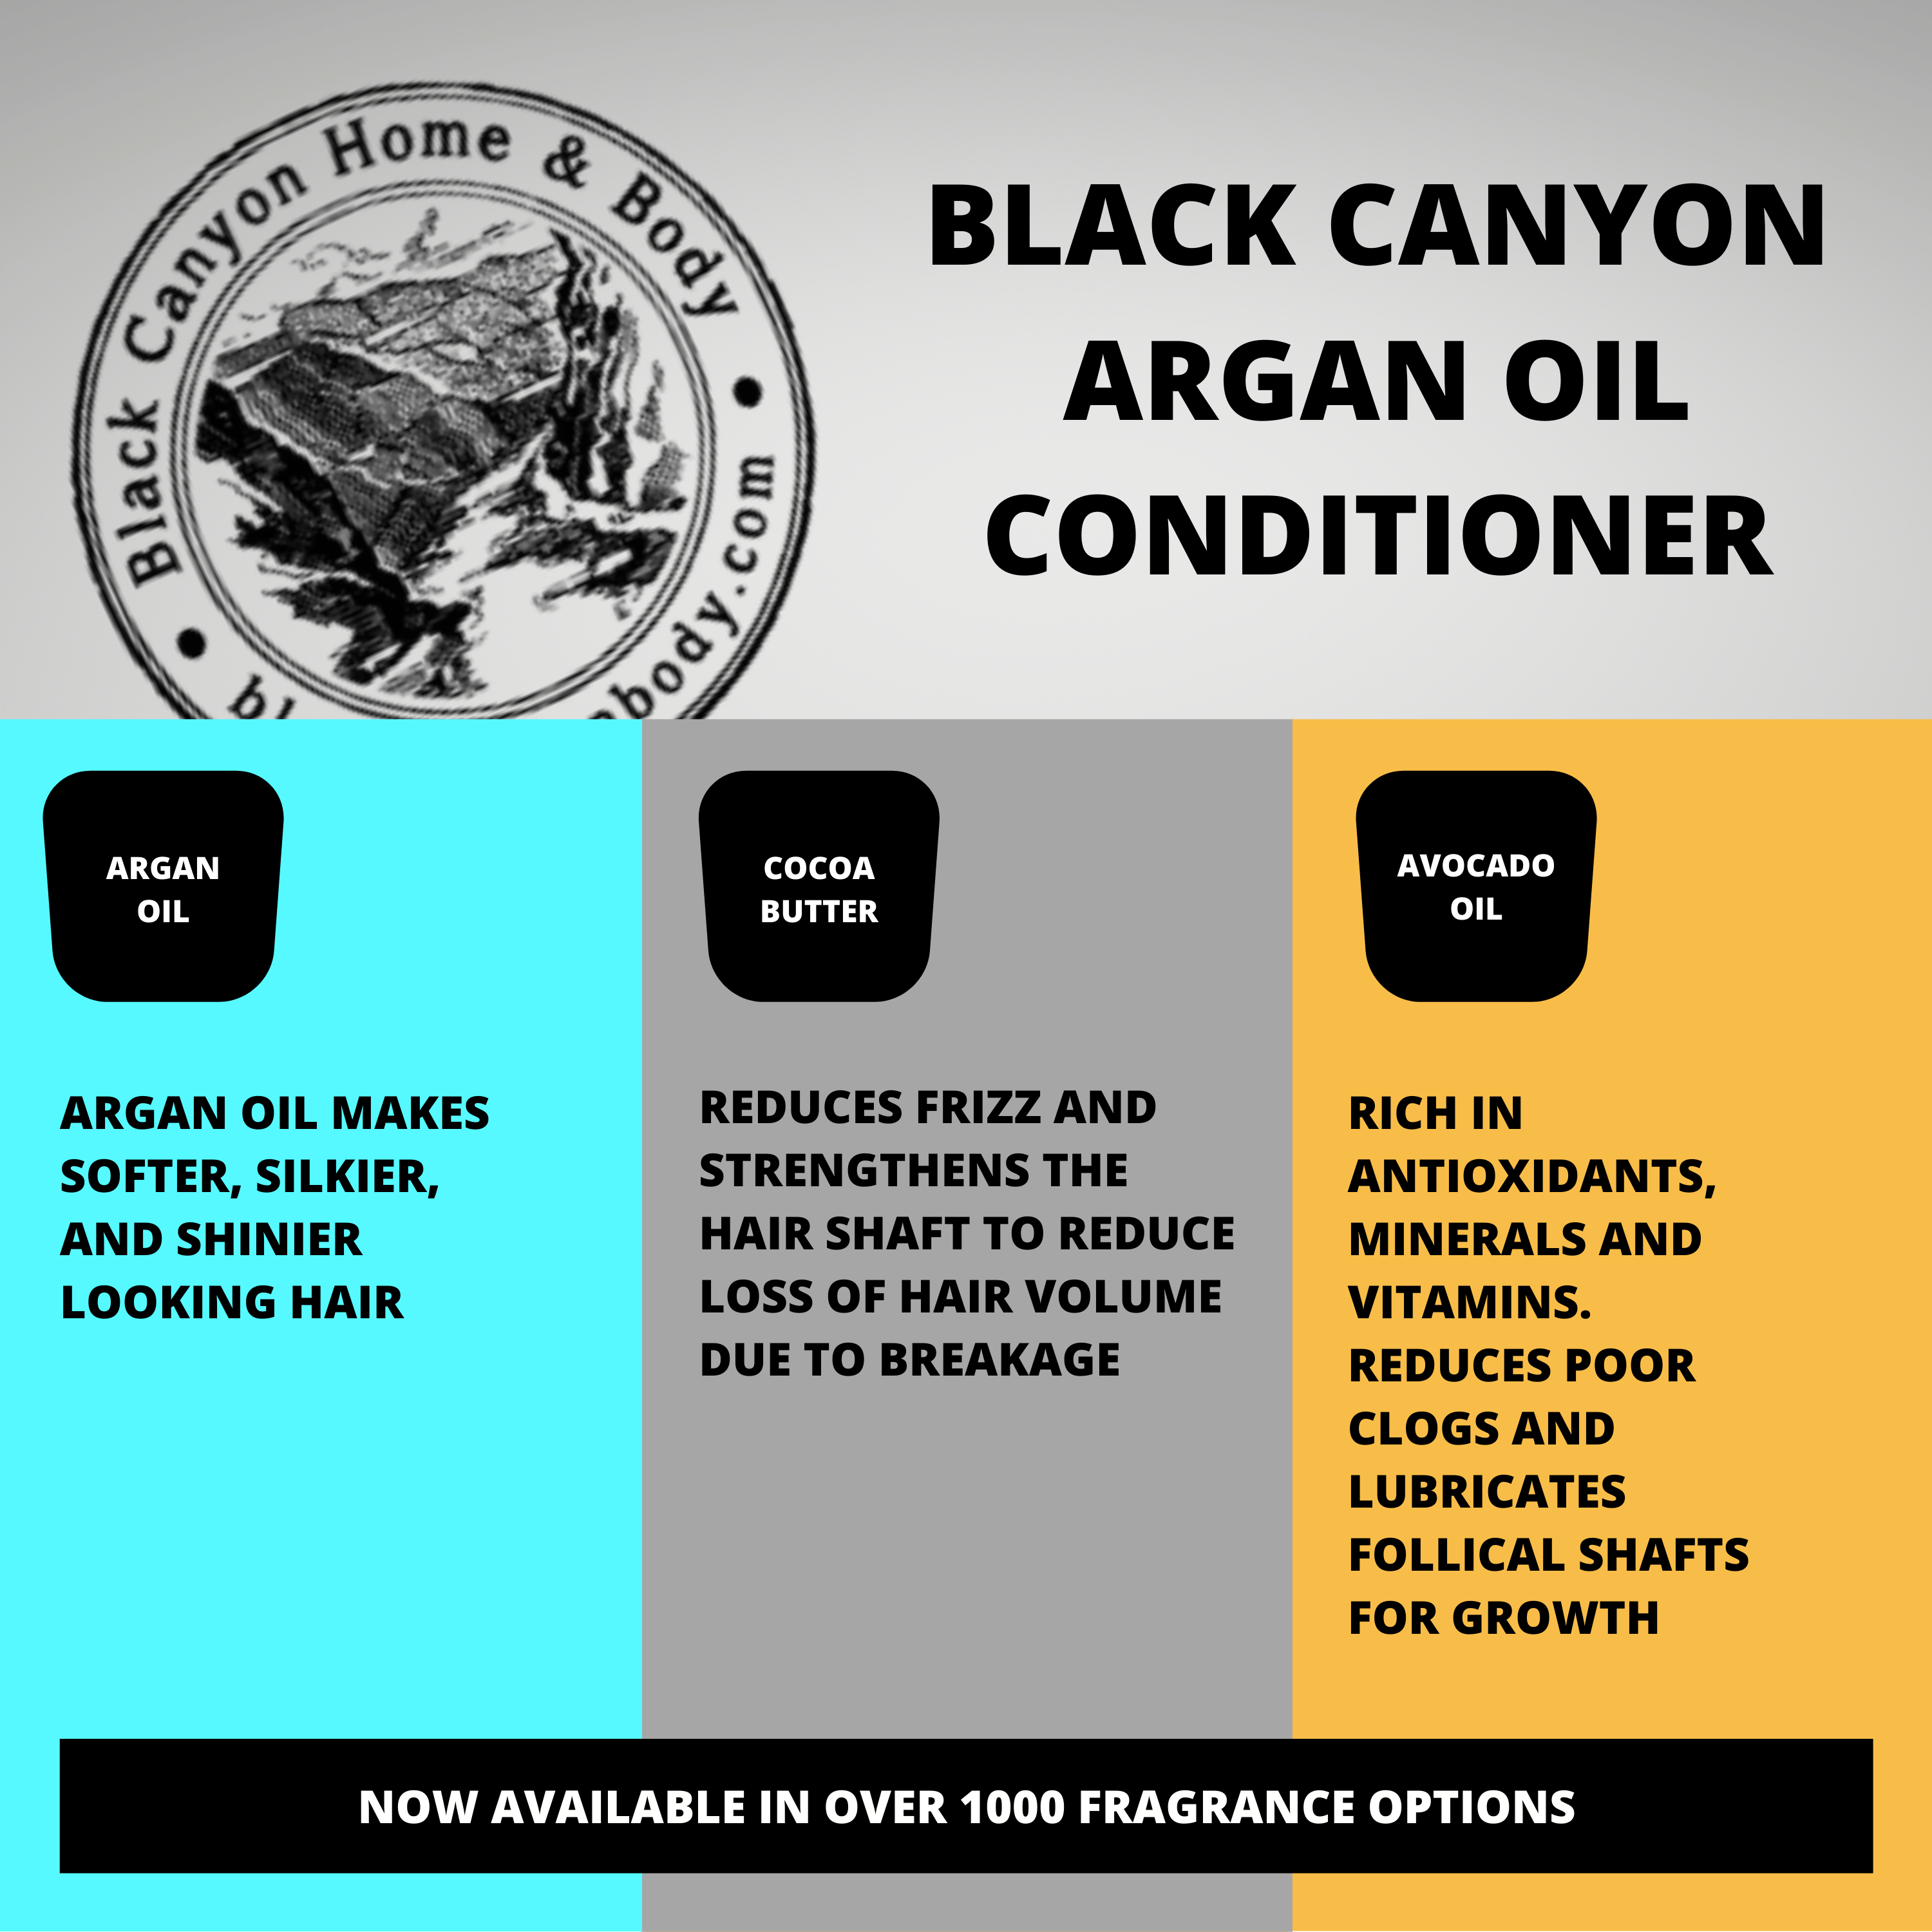 Black Canyon Grapefruit & Quince Scented Conditioner with Argan Oil